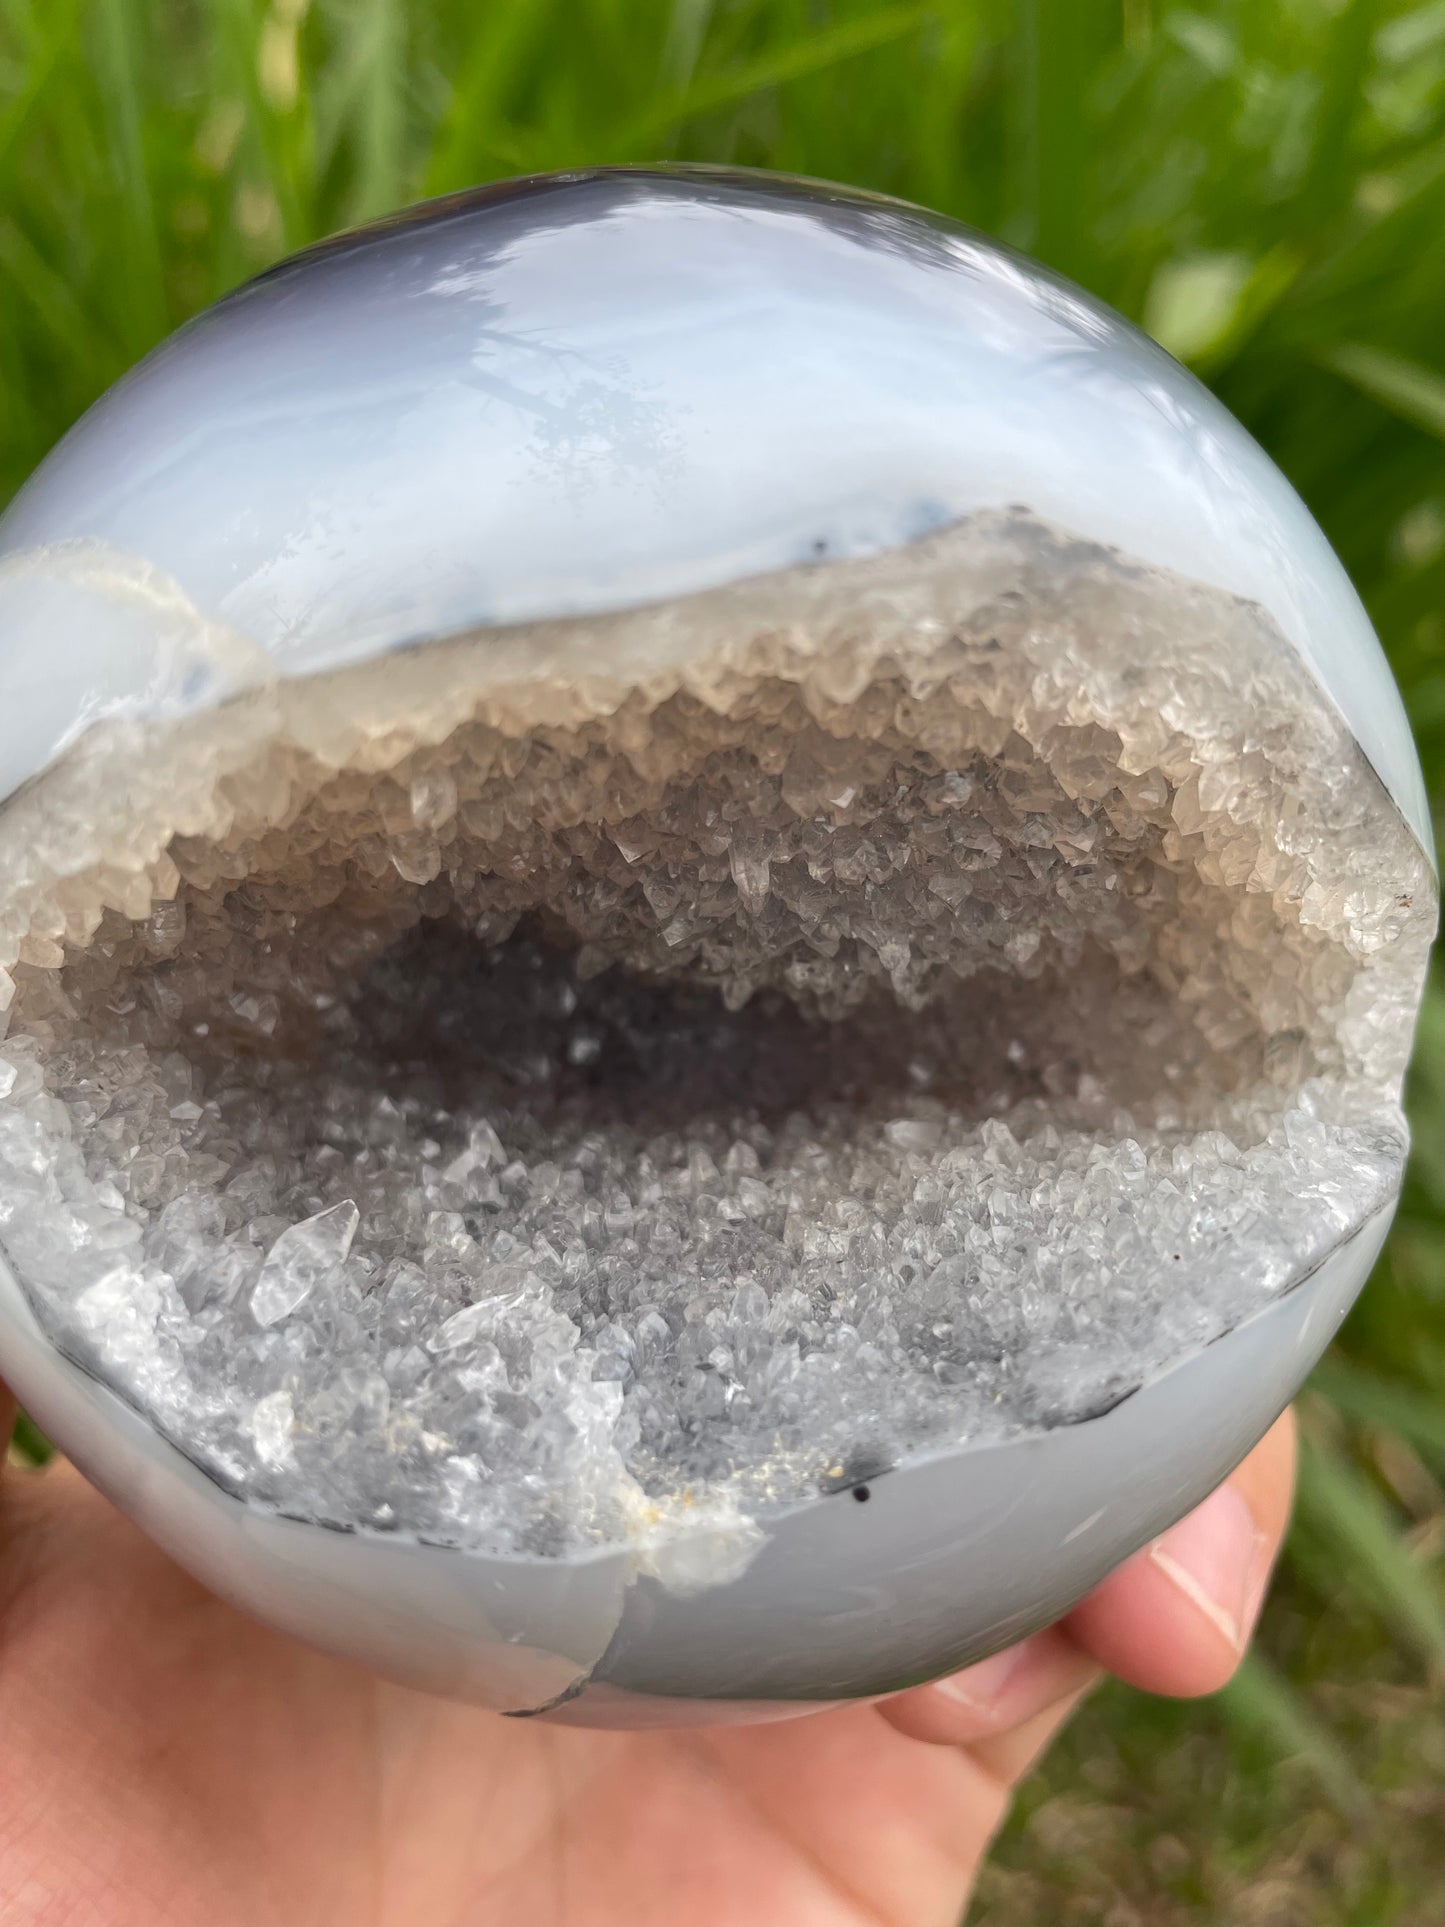 1.99LB Natural Geode Sphere,Agate Geode Ball,Natural Druse Ball,Crystal Ball Hole,Mineral Specimens,Crystal Heal,Crystal Gift,Home Decoration